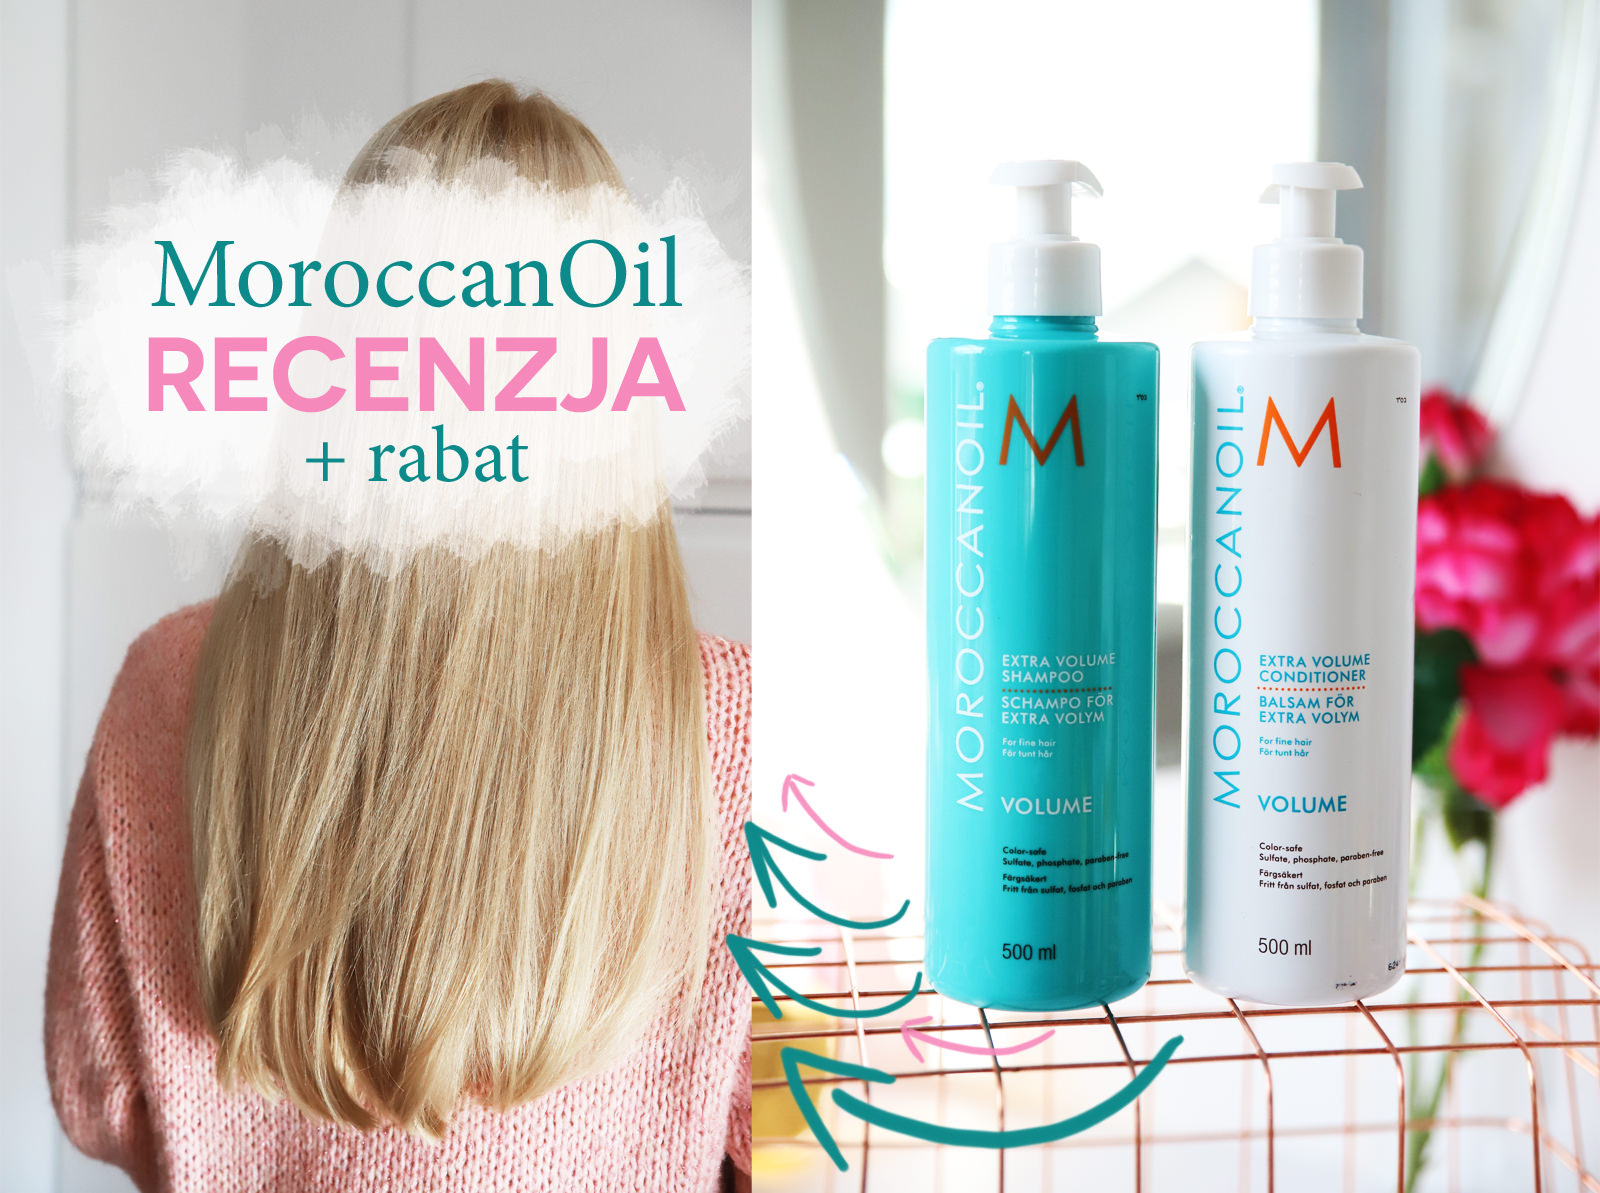 moroccan oil szampon opinie